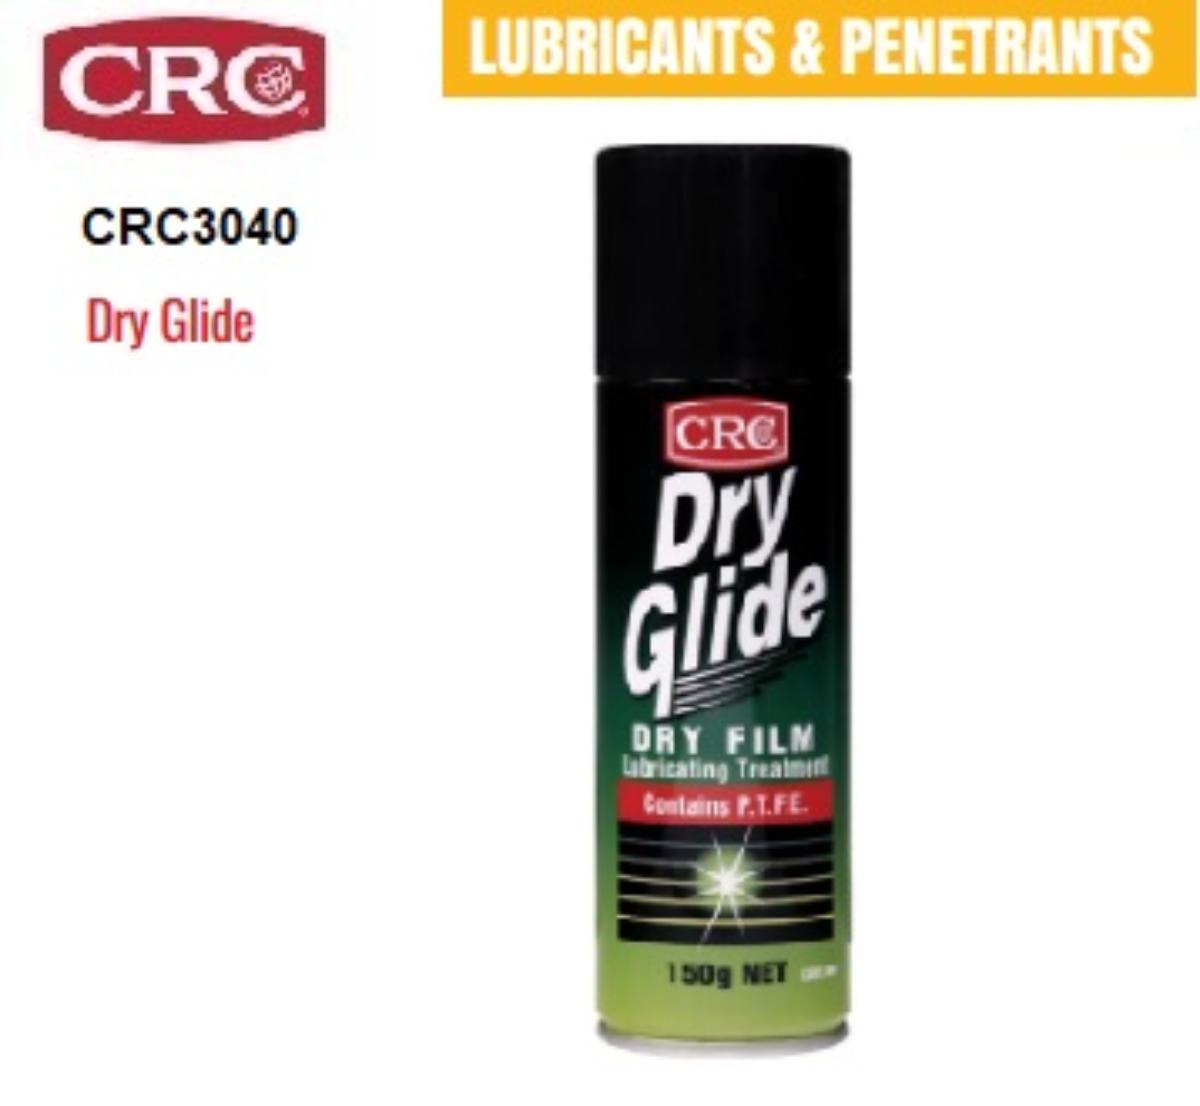 CRC DRY GLIDE WITH PTFE TEFLON 150g